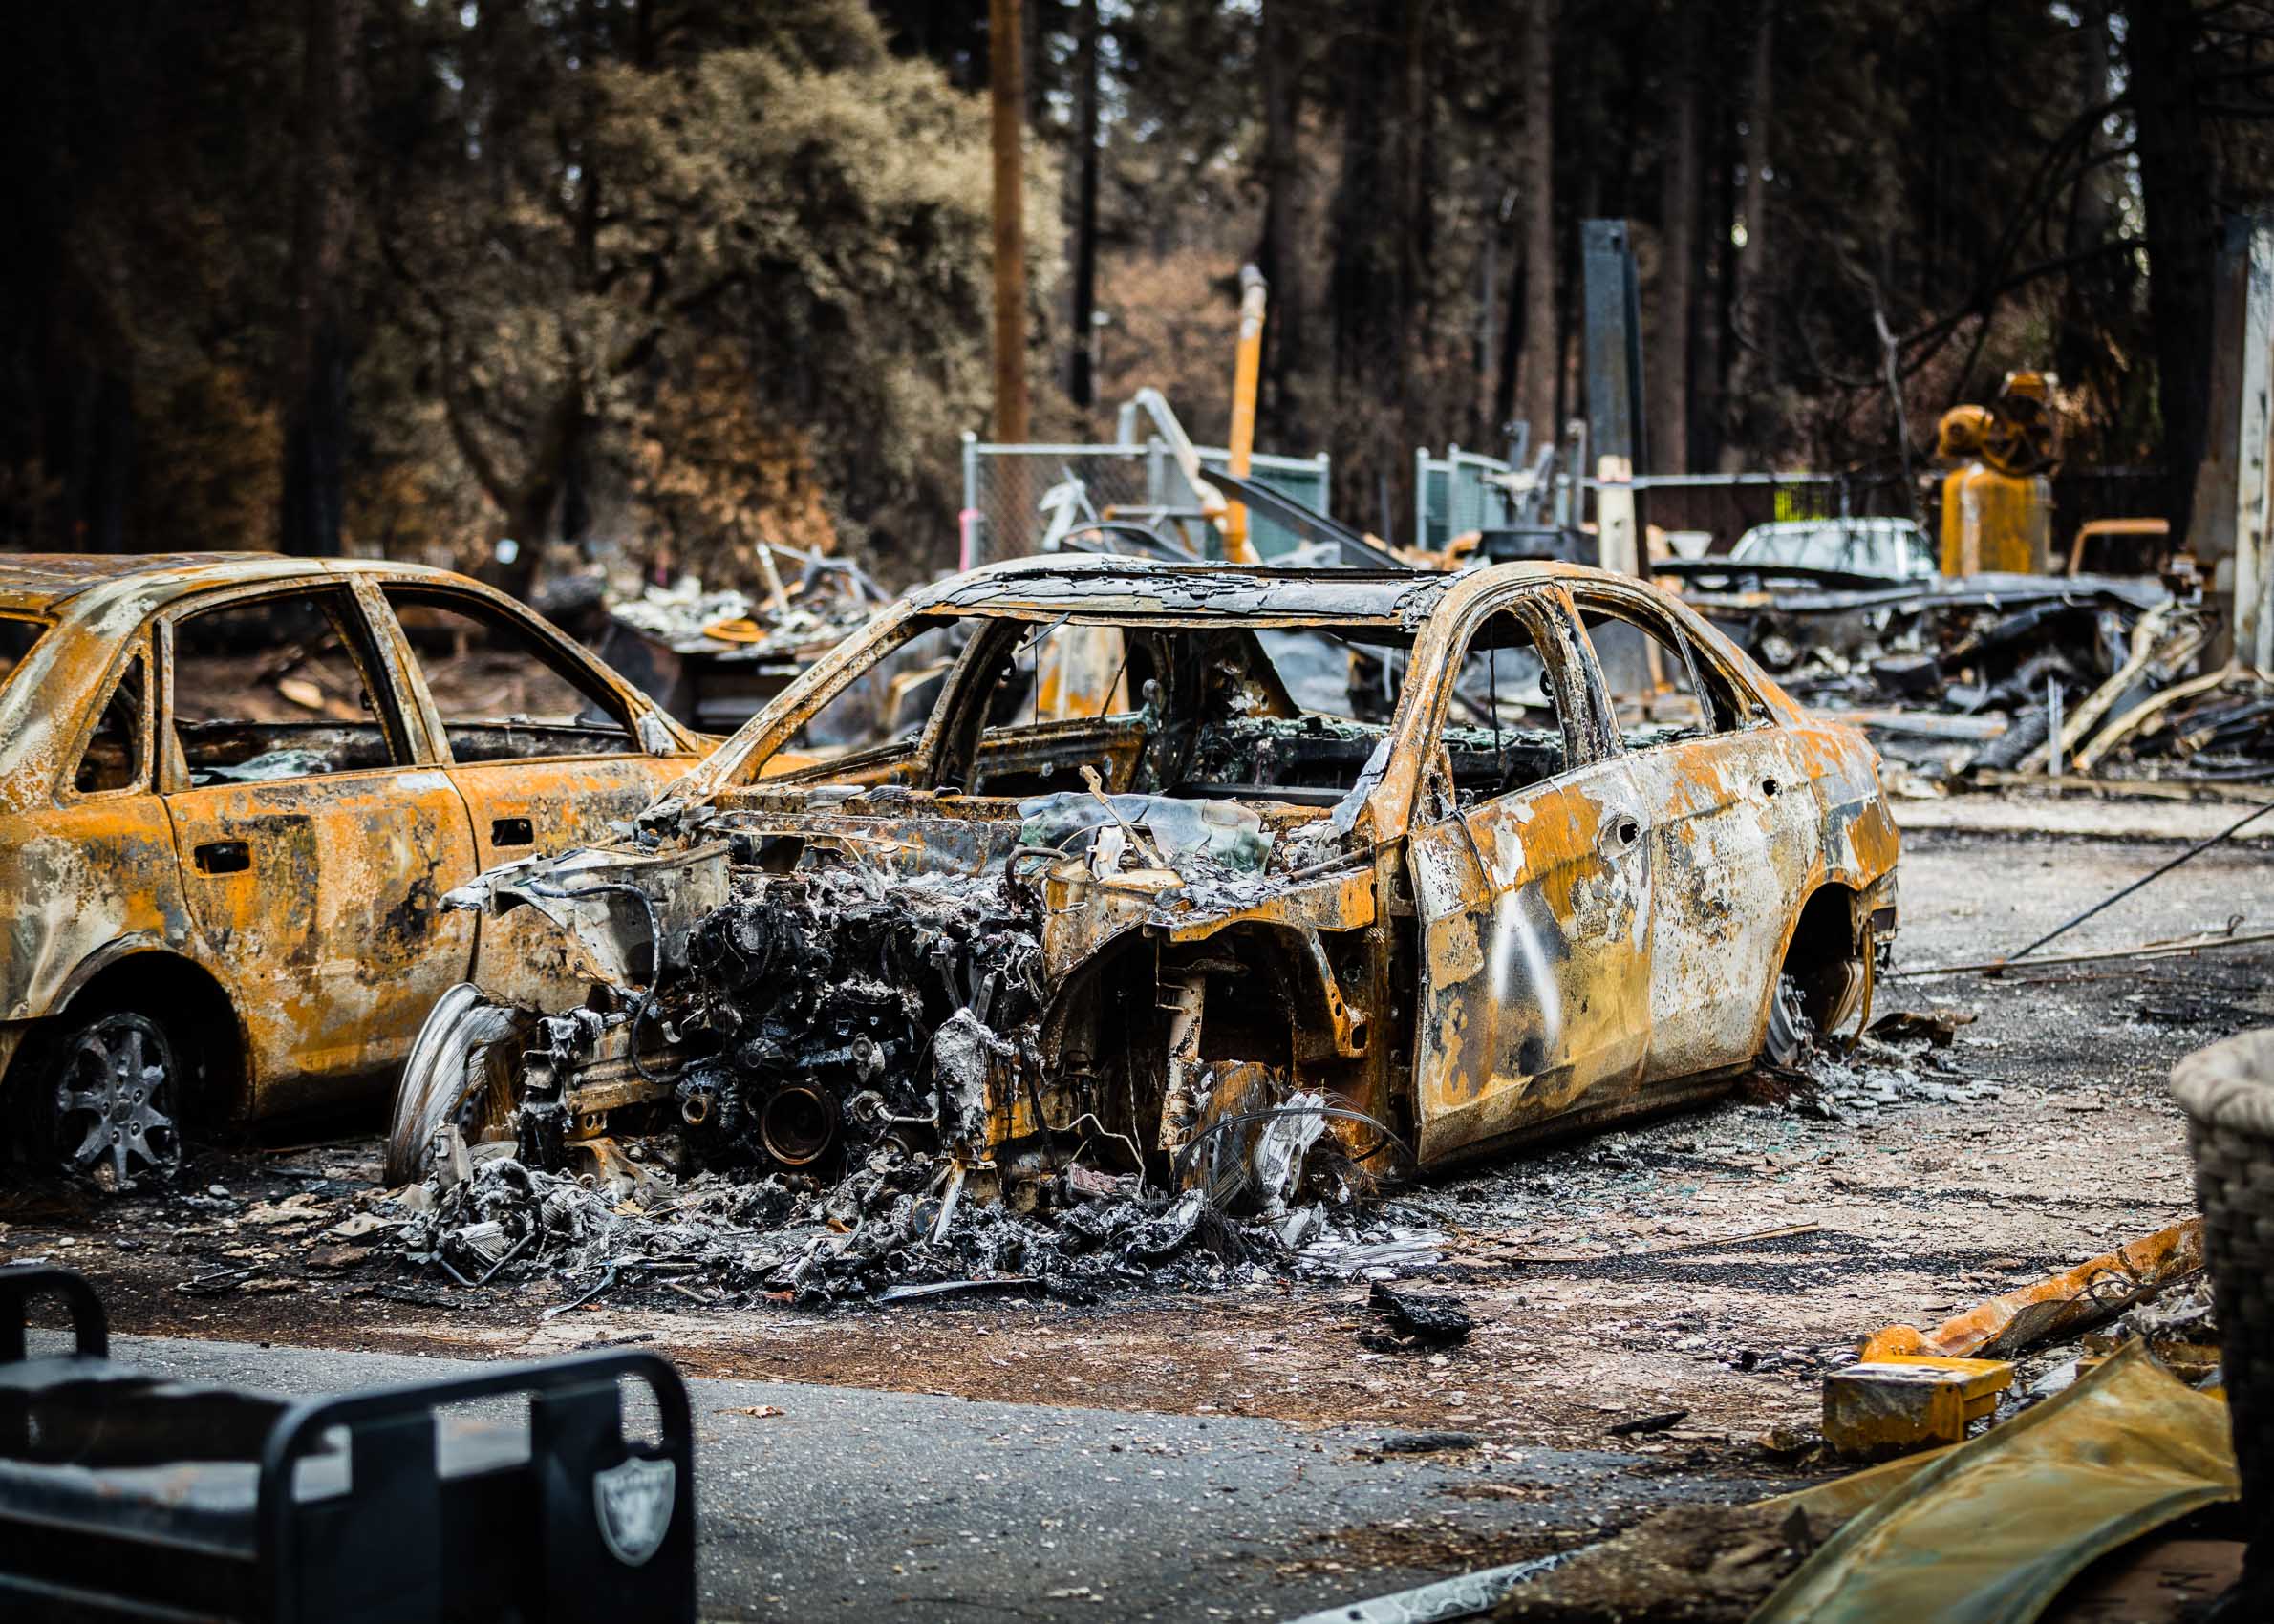 Paradise Lost. After the Camp Fire - the deadliest and most destructive wildfire in California history | PATRICK STRATTNER PHOTOGRAPHY